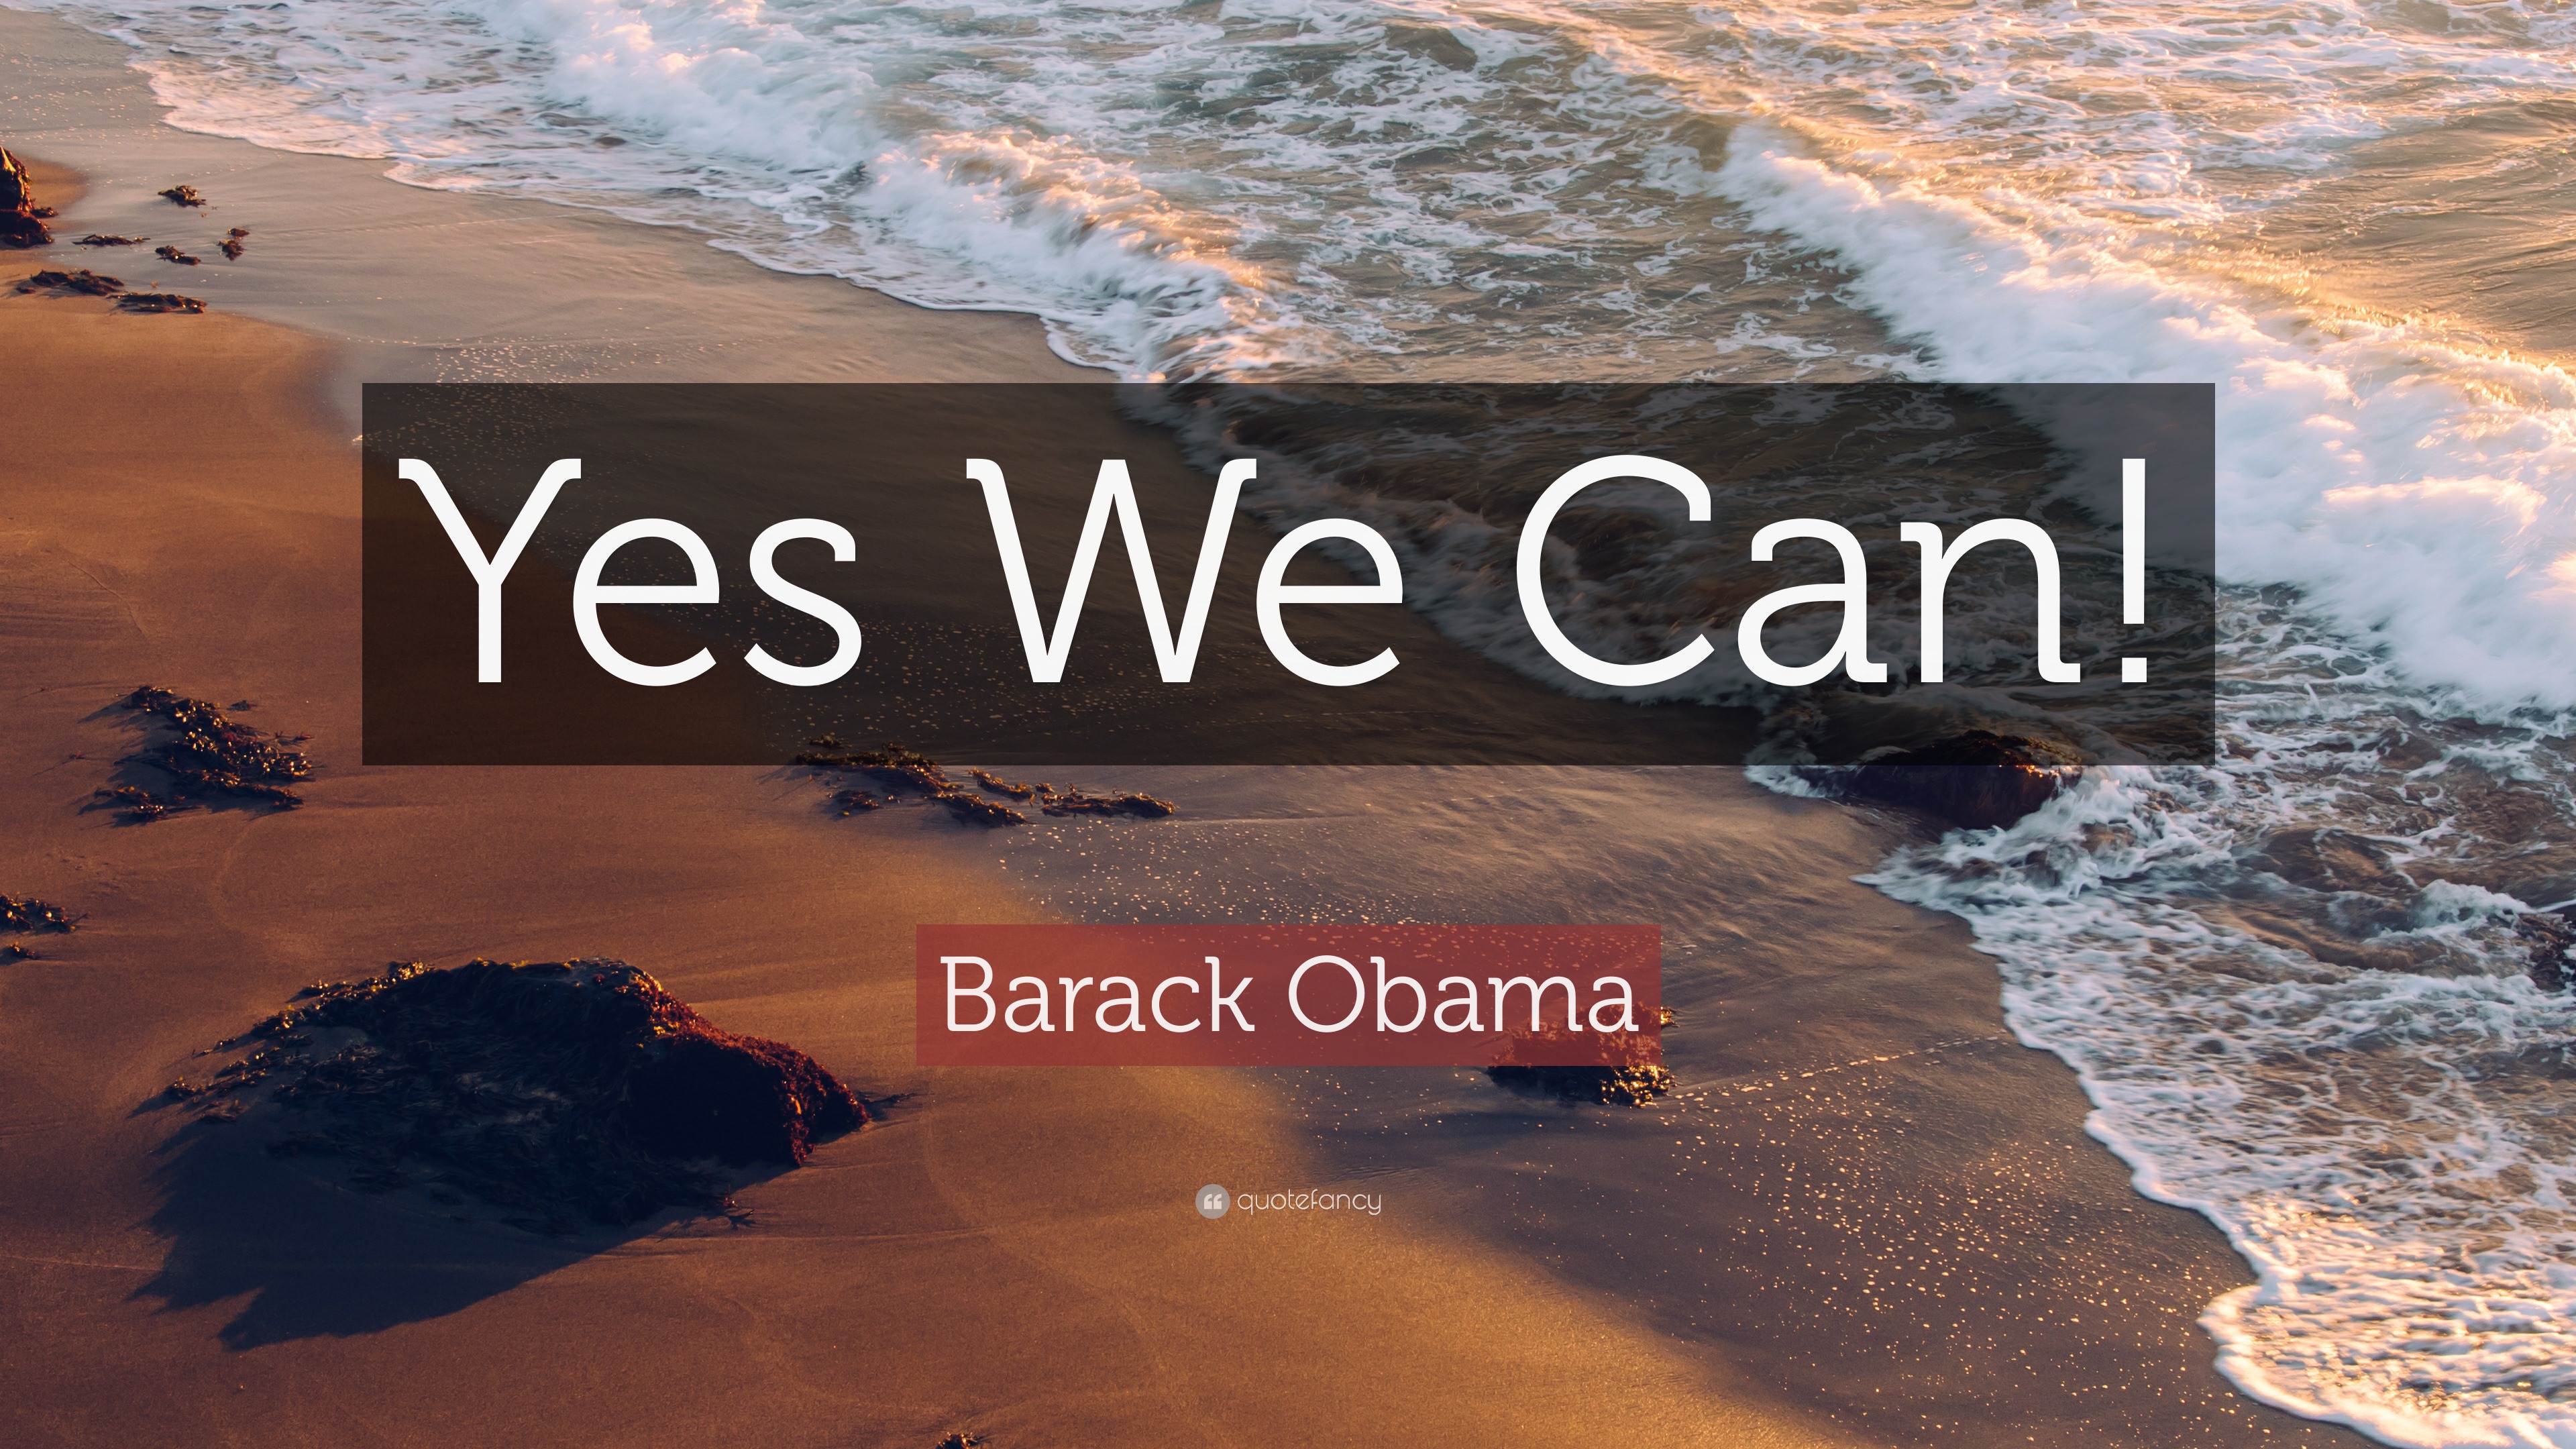 Barack Obama Quote: "Yes We Can!" (19 wallpapers) - Quotefancy